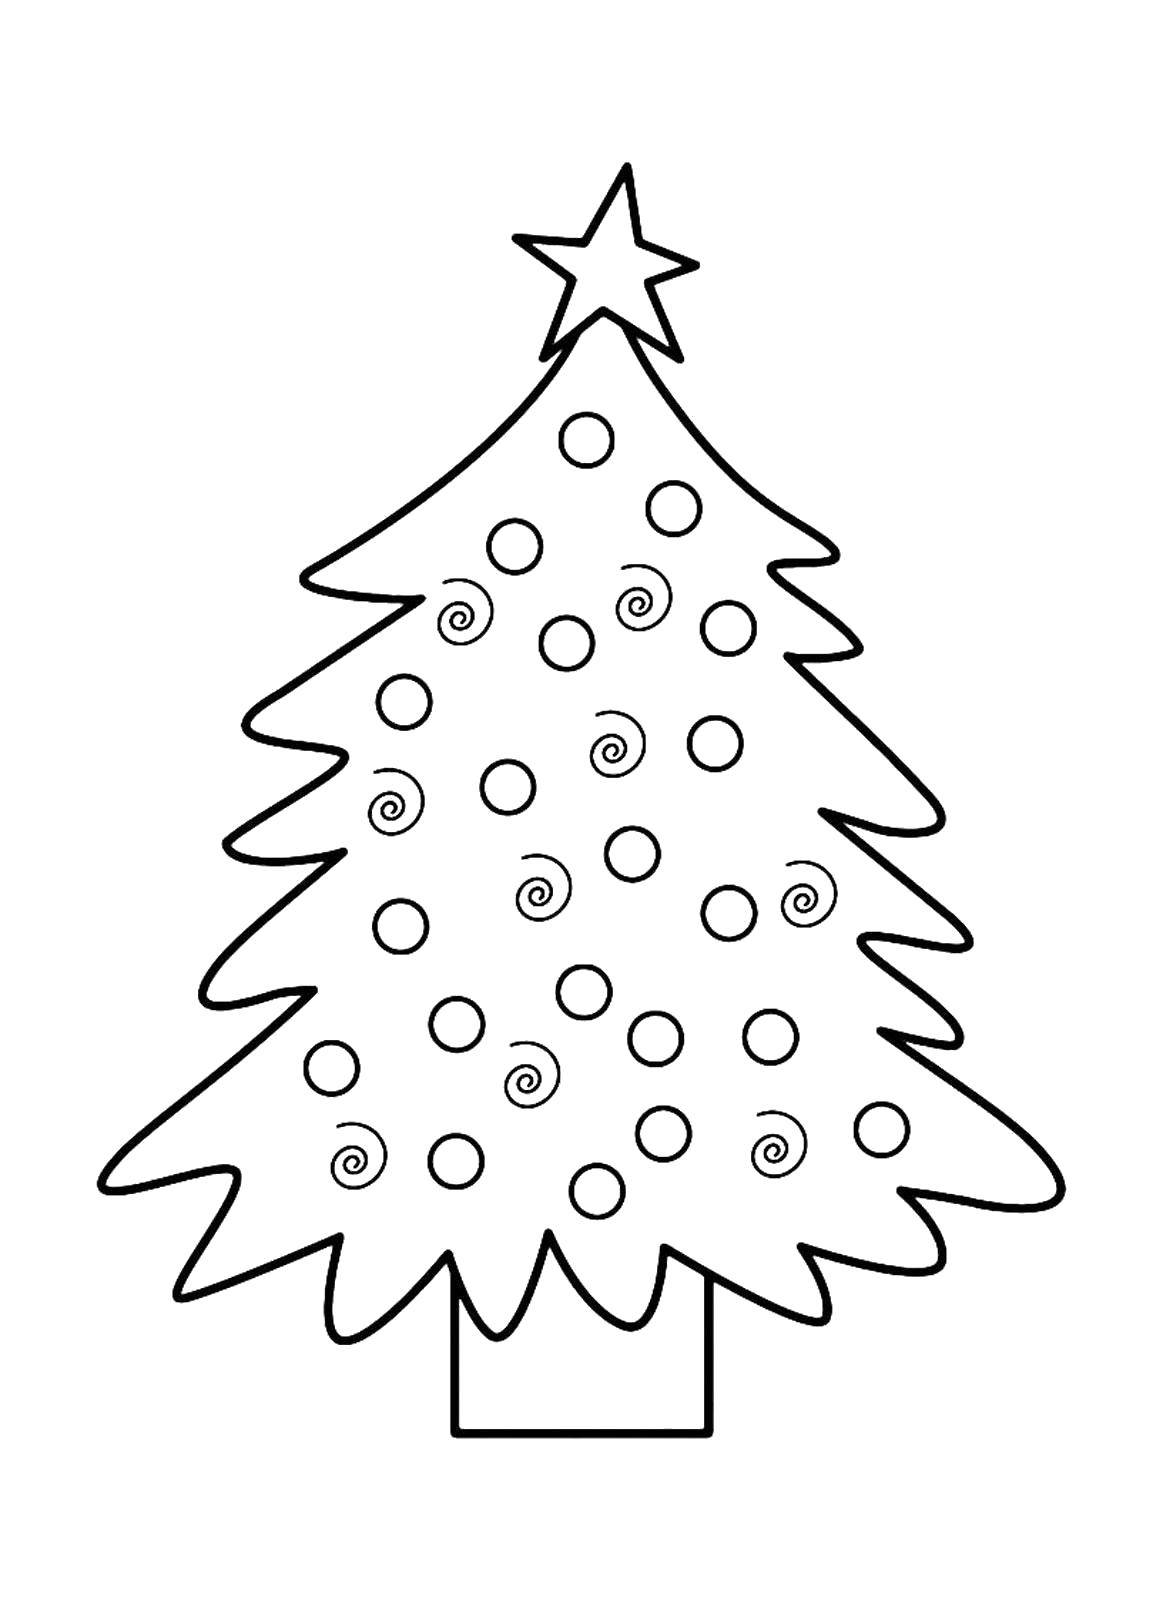 Coloring Herringbone. Category new year. Tags:  New Year, tree, gifts, toys.